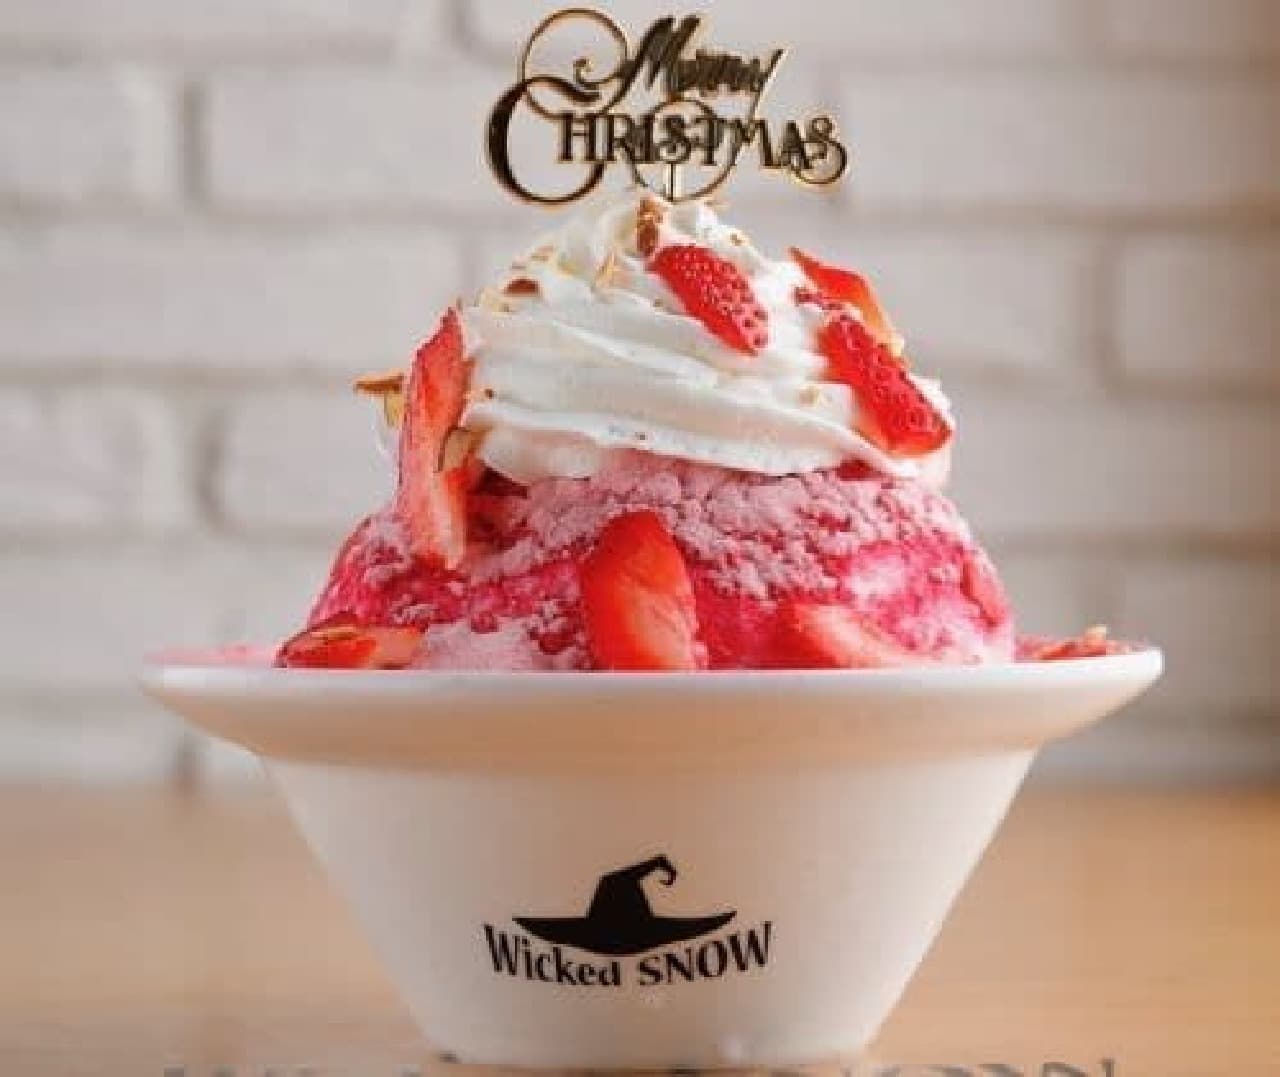 Wicked Santa is a shaved ice with berry sauce in fluffy shaved ice, strawberry powder on top, and strawberries on the toppings.